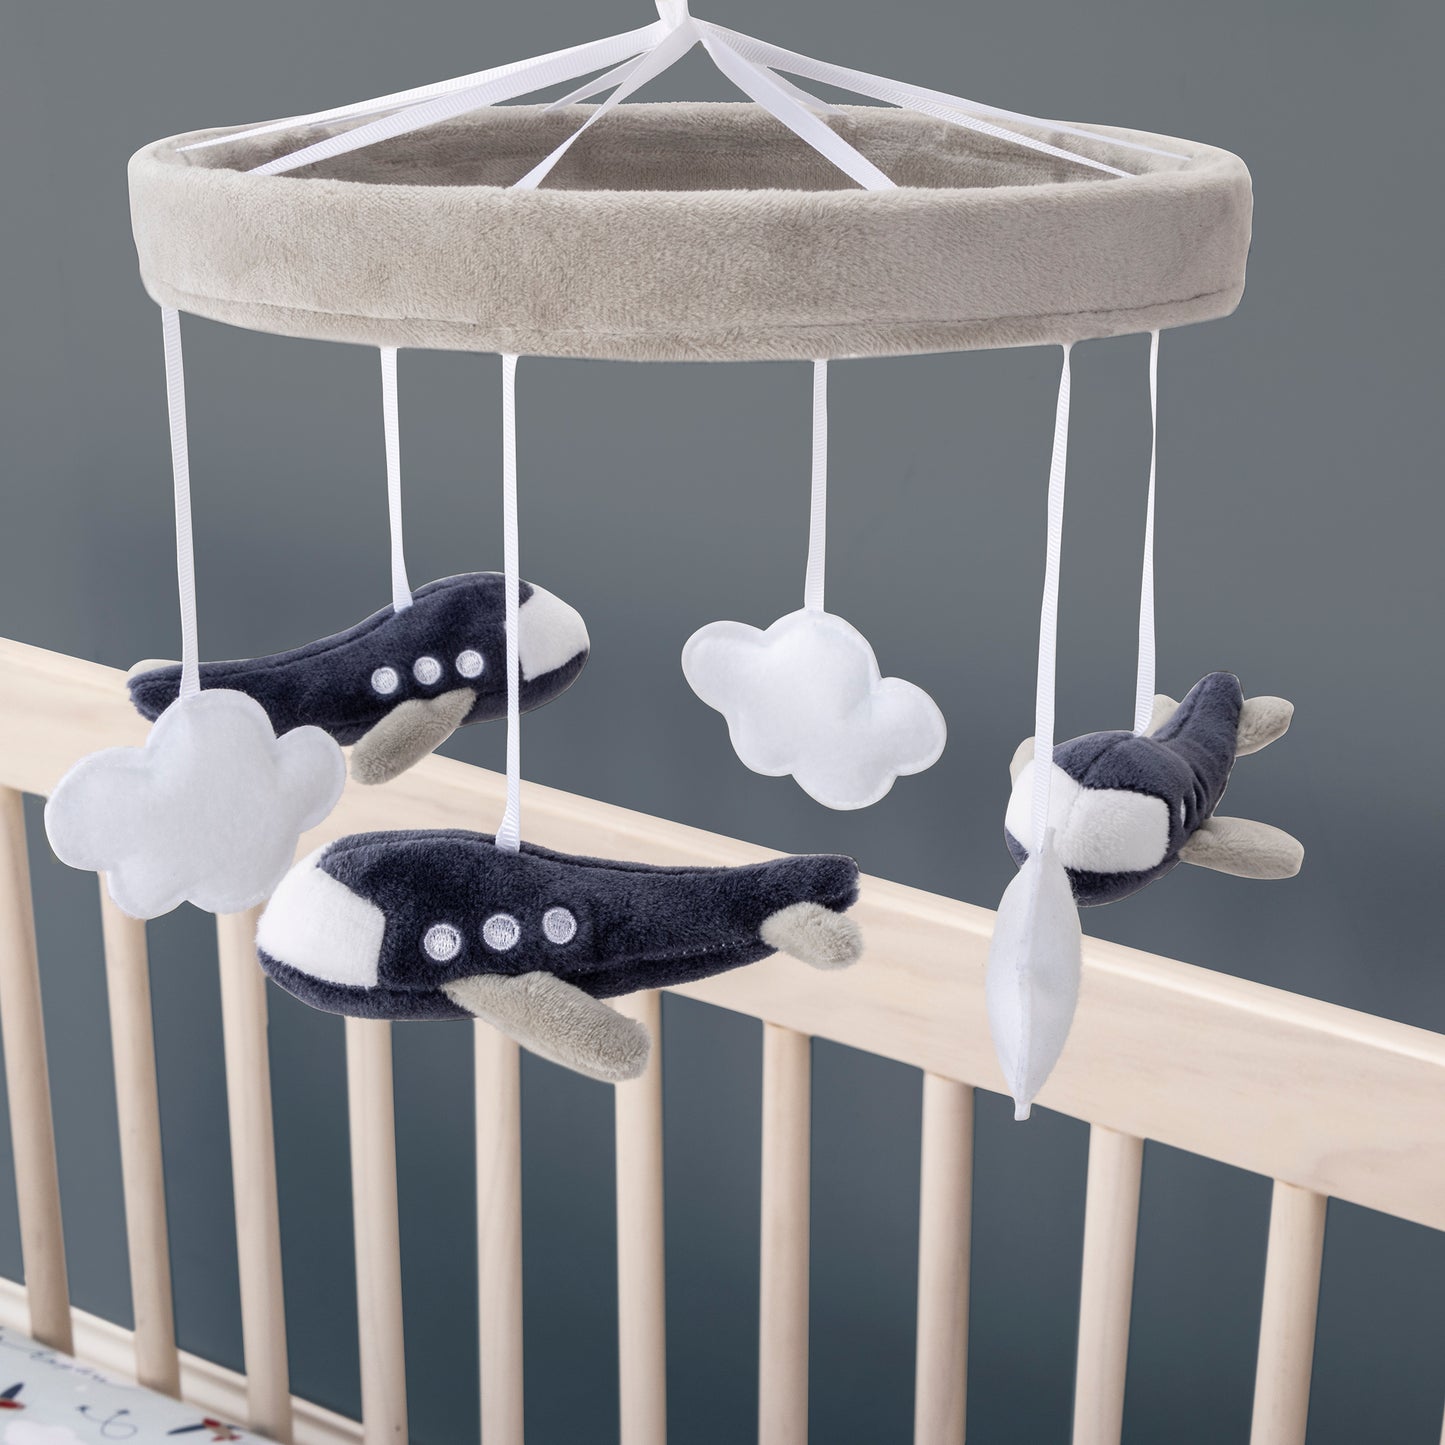 Airplane Musical Crib Baby Mobile by Sammy & Lou®- stylized image in baby room